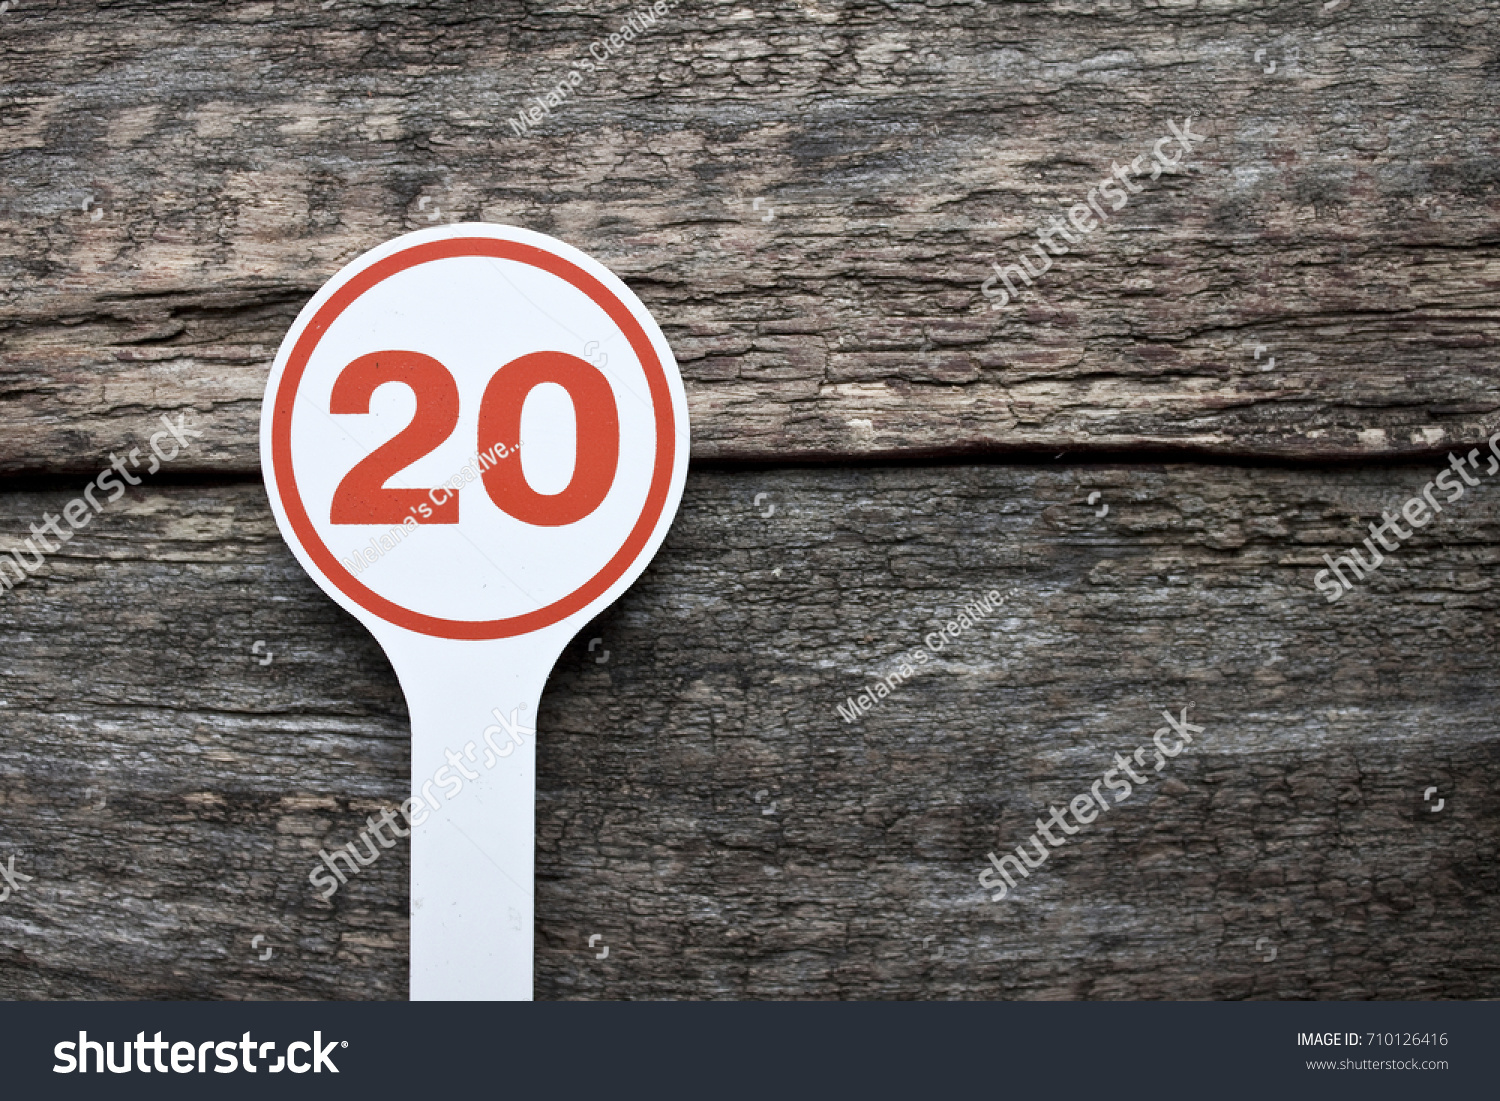 Plate number on a old wooden background. Numbers for lists or numbering concept.  #710126416